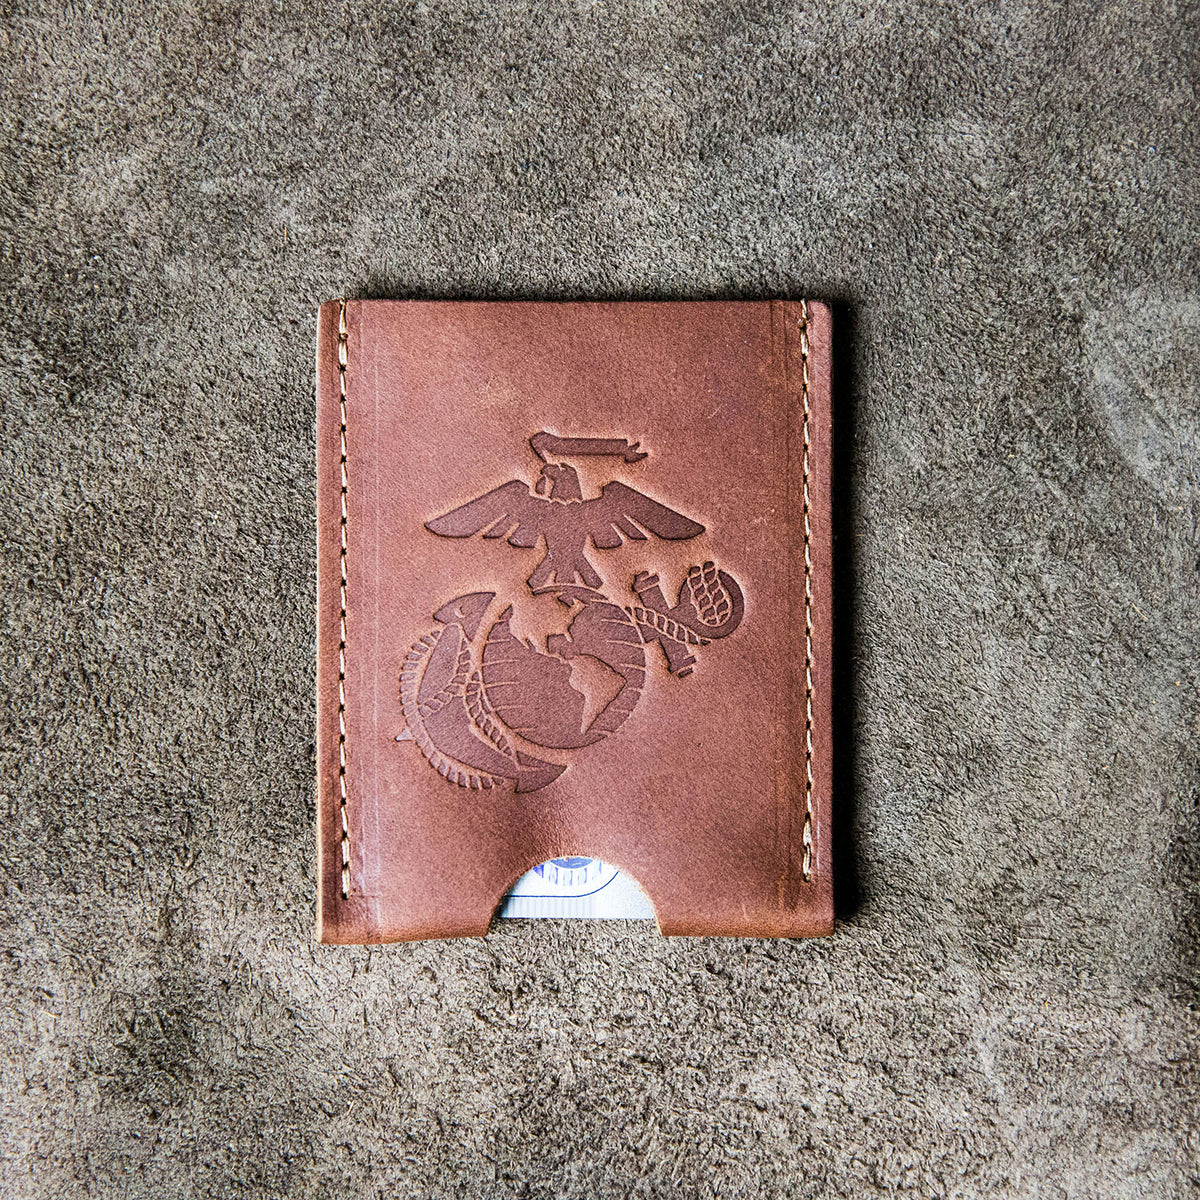 The Officially Licensed Marine Corps Jefferson Fine Leather Card Holder Wallet